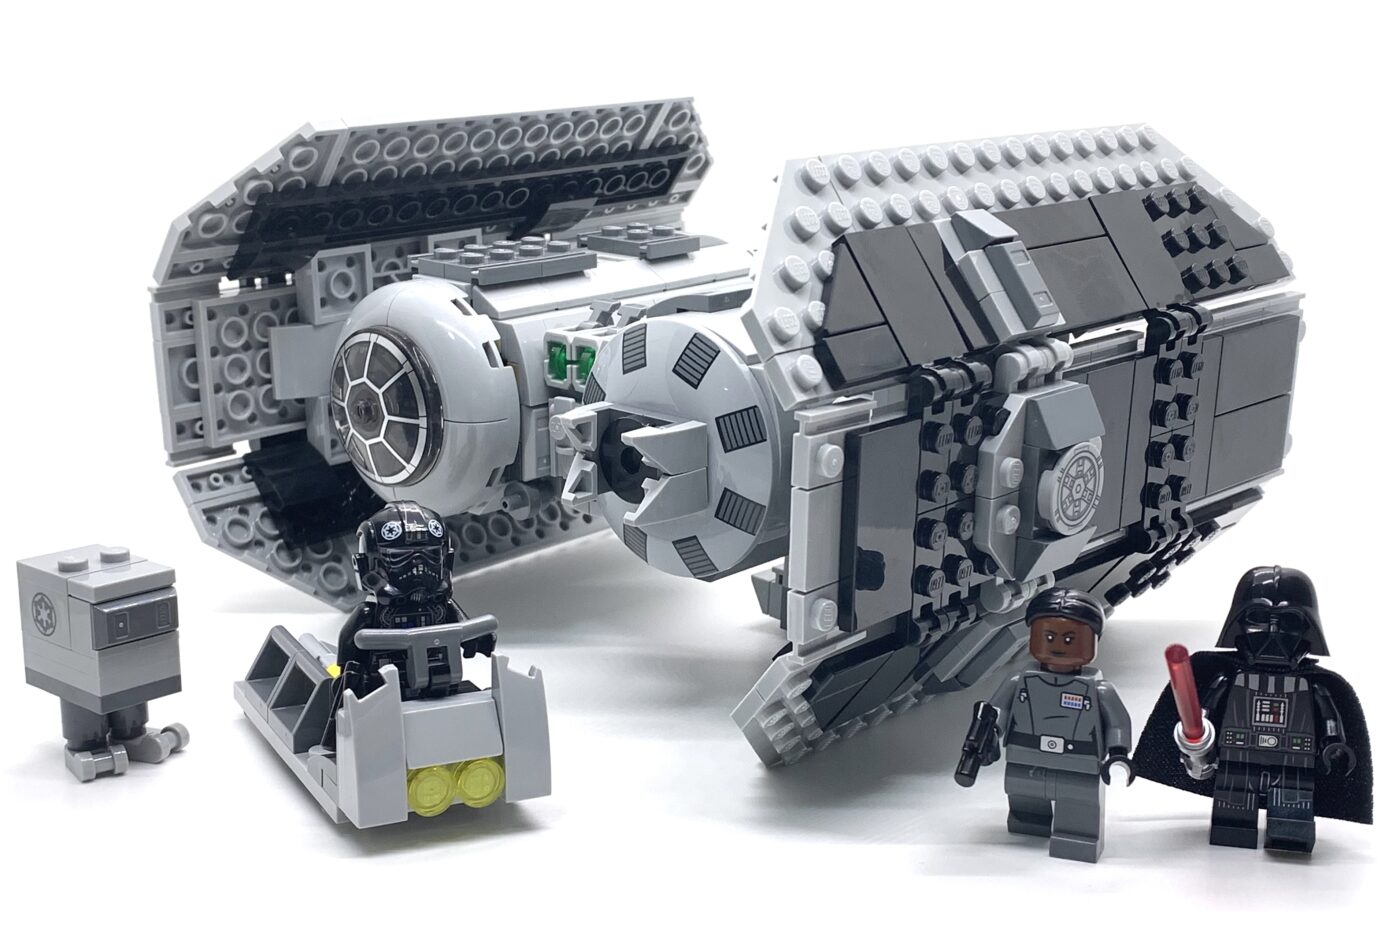 Review: LEGO 10300 Back to the Future Time Machine - Jay's Brick Blog